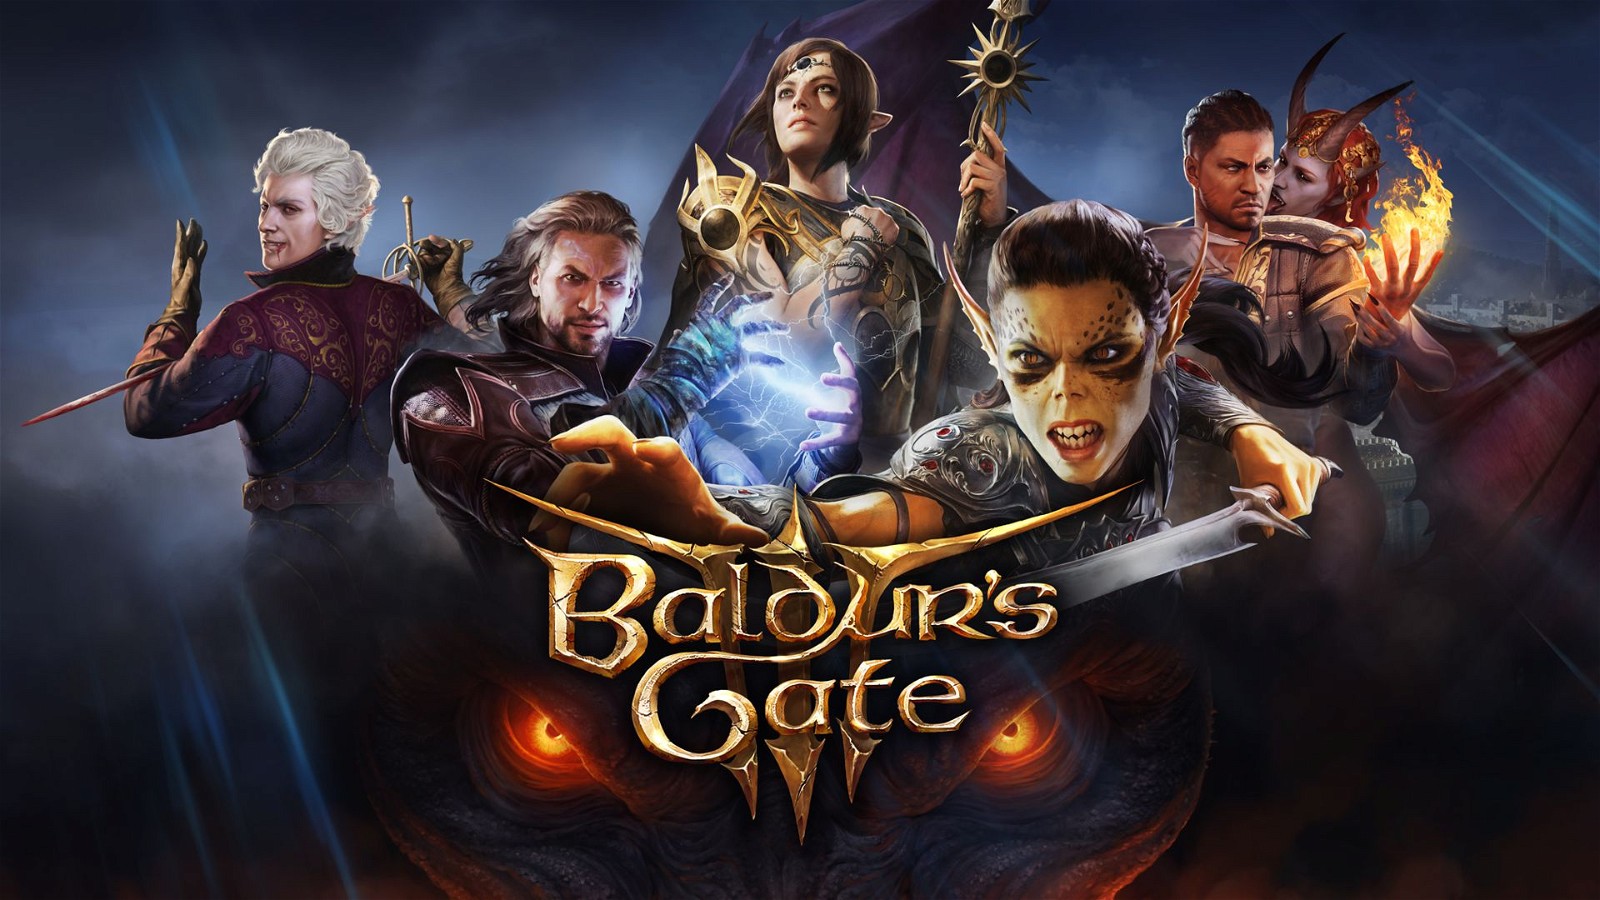 Baldur's Gate 3 gets new PC release date, delayed PS5 version - Polygon